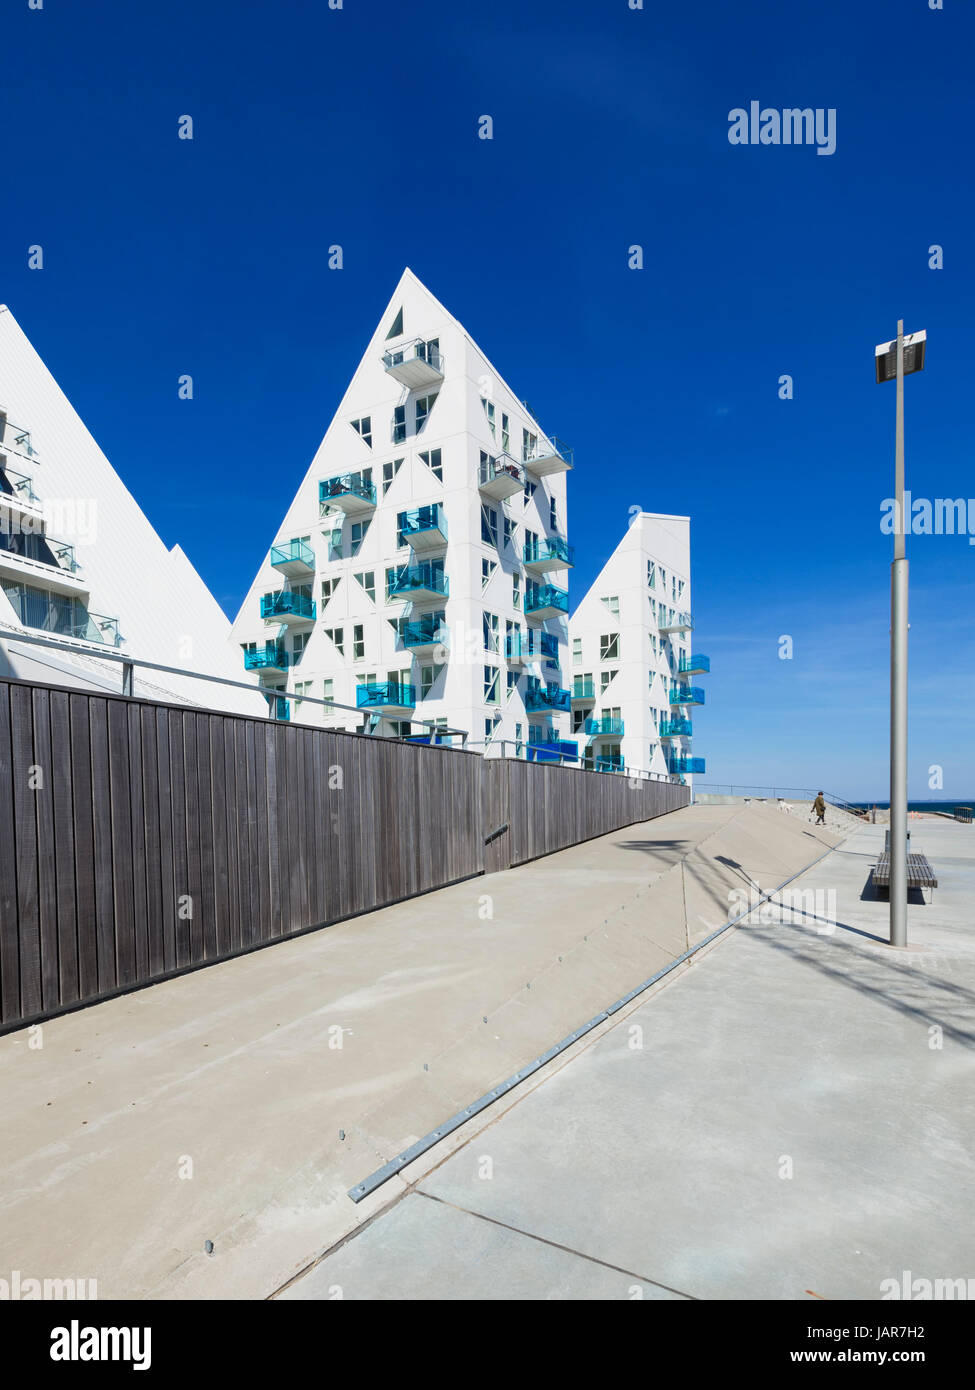 Aarhus, Denmark - May 2, 2017: Contemporary residential architecture at newly developed harbor area. The complex is called 'Isbjerget', which is Danis Stock Photo